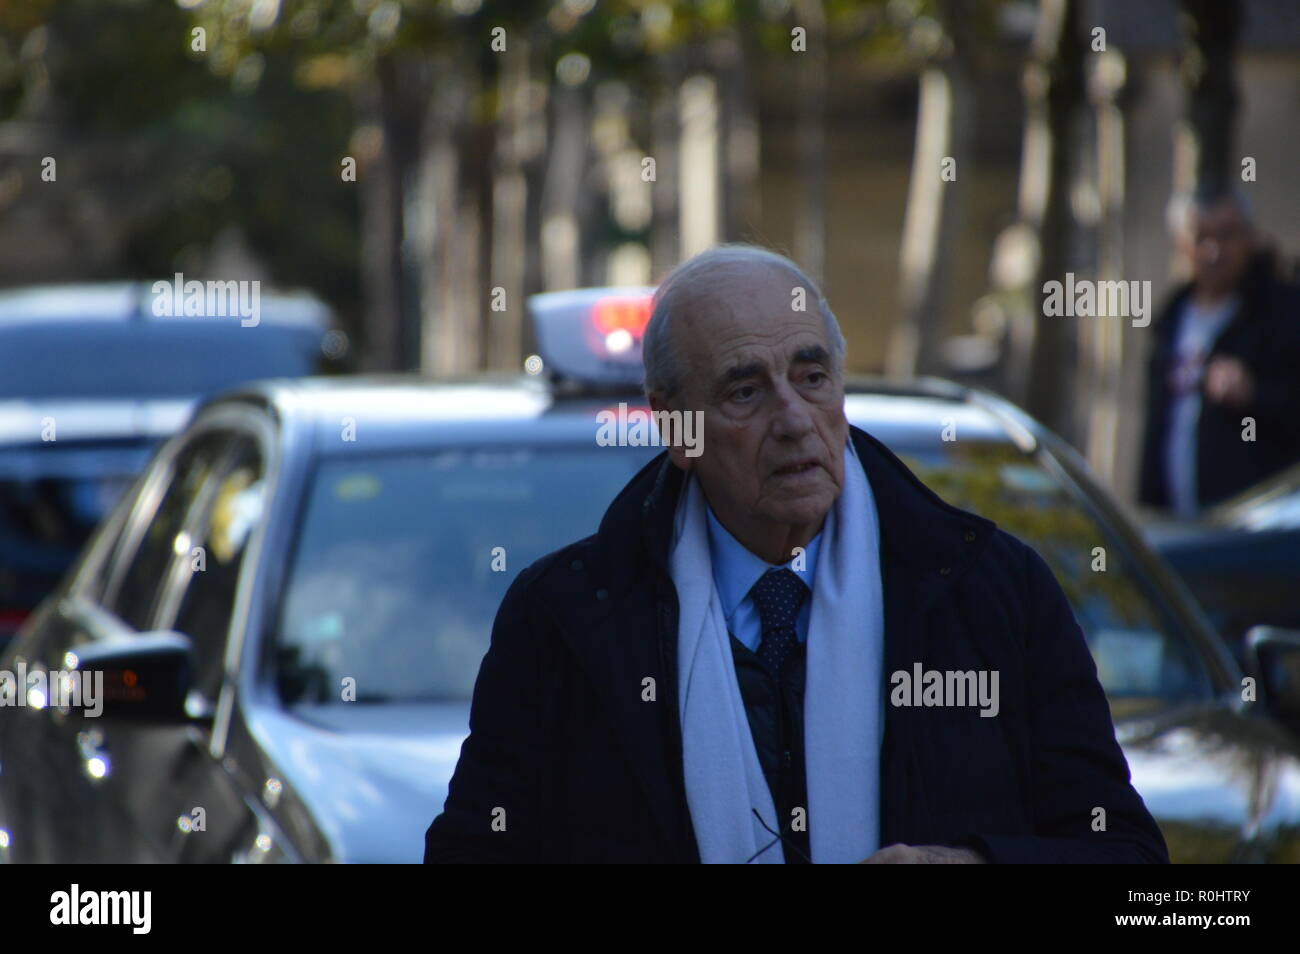 Paris, France. 5th Nov 2018. French celebrities attend the ceremony for the death of Philippe GILDAS, french TV animator. Crematorium of the Cemetery of the Pere Lachaise, Paris, France. 5 november 2018. 13h30.  ALPHACIT NEWIM / Alamy Live News Credit: Alphacit NEWIM/Alamy Live News Stock Photo